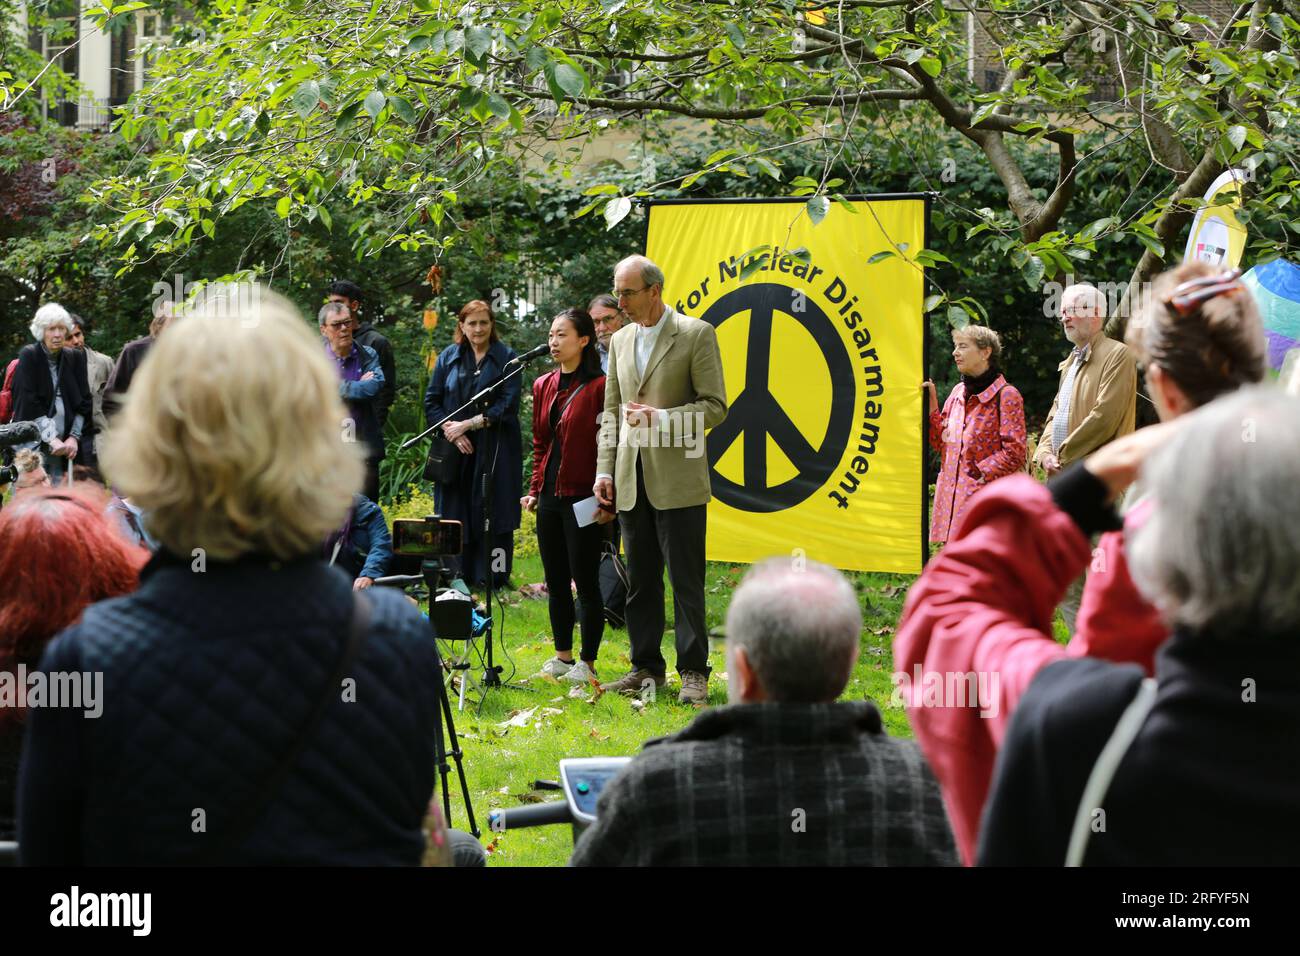 London, UK. 06 August 2023. Hiroshima Day commemorates the victims of the US atomic bombs dropped on Japan during World War II. The Hiroshima Remembered event in Tavistock Square was organized by the London Campaign for Nuclear Disarmament (CND). Gathered at the annual event, they call for a complete ban on nuclear weapons. Credit: Waldemar Sikora/Alamy Live News Stock Photo